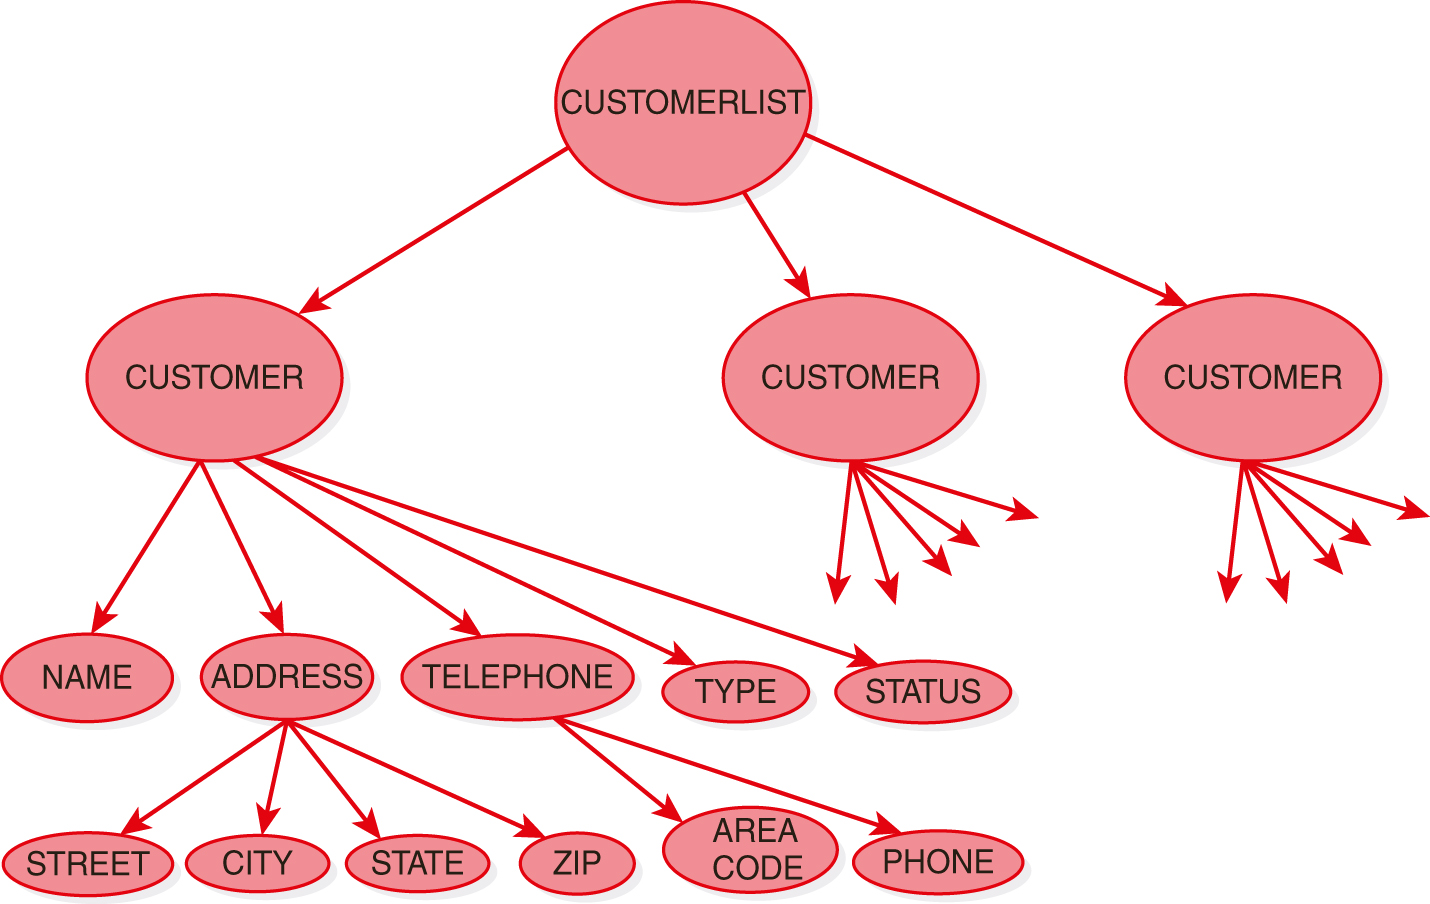 A tree diagram for the hierarchical representation of CUSTOMER LIST. Node 1 is labeled CUSTOMER LIST. Node 2, Node 3, and Node 4 below node 1 are each labeled customer. Arrows are drawn from Node 1 to Nodes 2, 3, and 4. Node 5, Node 6, Node 7, Node 8, and Node 9 are below Node 2. Arrows are drawn from Node 2 to Nodes 5, 6, 7, 8, and 9. Node 5 is labeled Name. Node 6 is labeled Address. Node 7 is labeled Telephone. Node 8 is labeled Type. Node 9 is labeled Status. 5 arrows are drawn away from Nodes 3 and 4. Node 10, Node 11, Node 12, and Node 13 are below Node 6. Arrows are drawn from Node 6 to Nodes 10, 11, 12, and 13. Node 10 is labeled Street. Node 11 is labeled City. Node 12 is labeled State. Node 13 is labeled Zip. Node 14 and Node 15 are below Node 7. Node 14 is labeled Area Code. Node 15 is labeled Phone. 